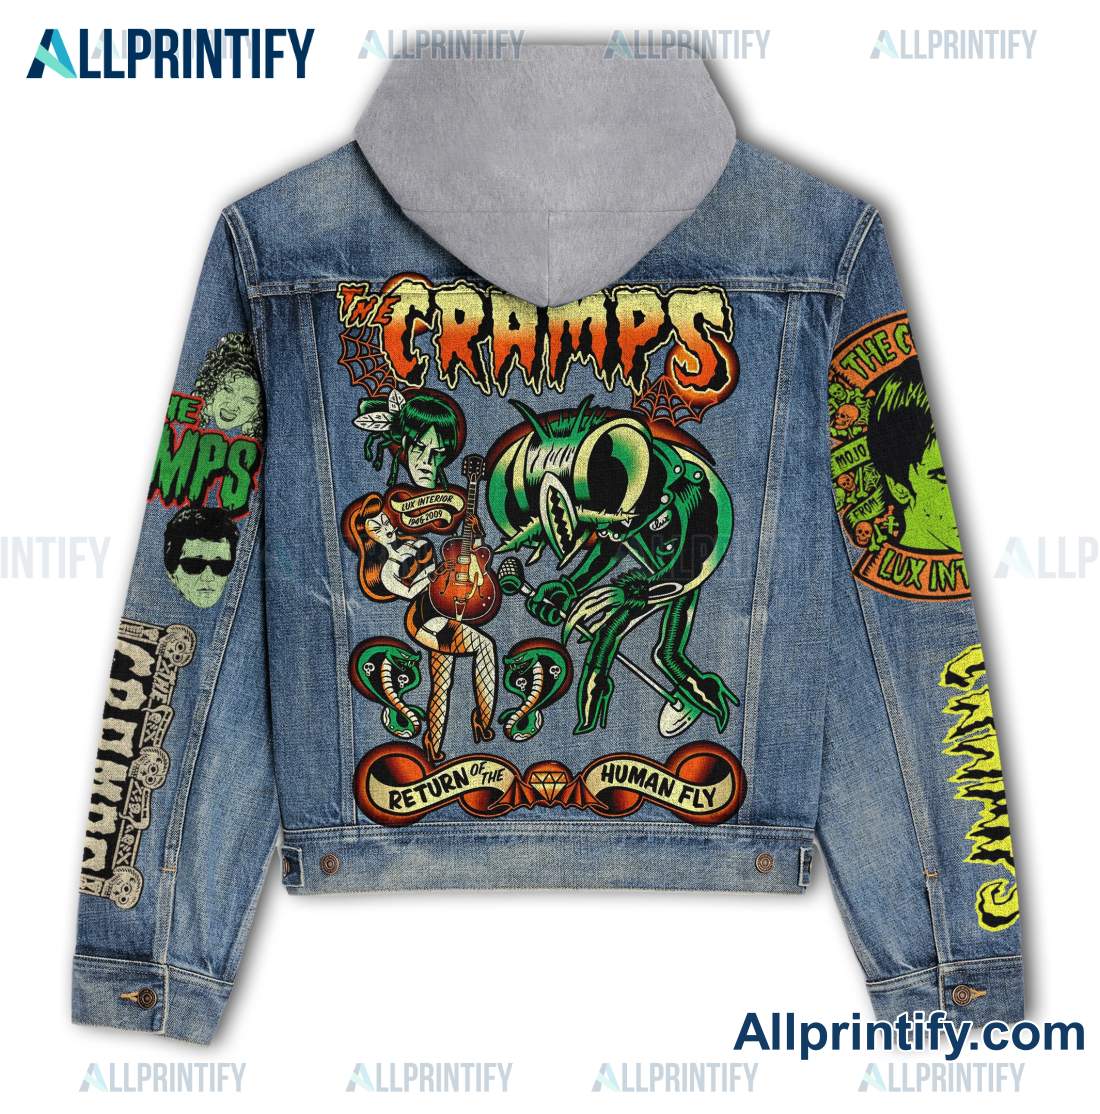 The Cramps Return Of The Human Fly Hooded Denim Jacket b